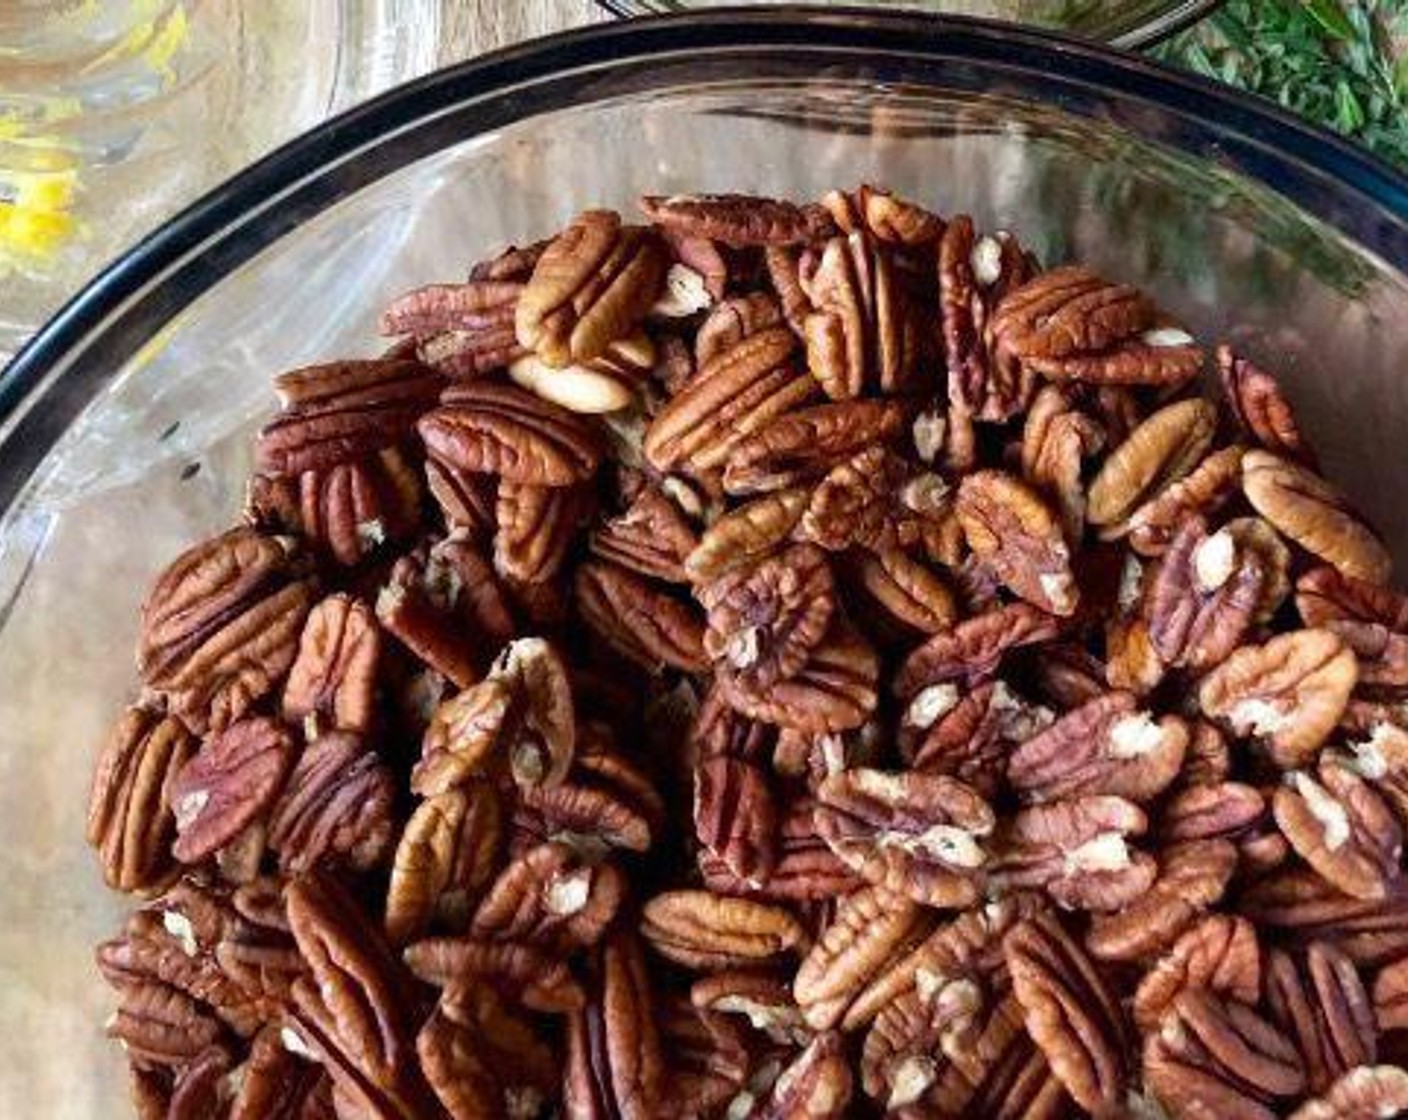 step 2 Brush a sheet pan generously with Vegetable Oil. Place the Pecan Halves (8 cups) in a large bowl.